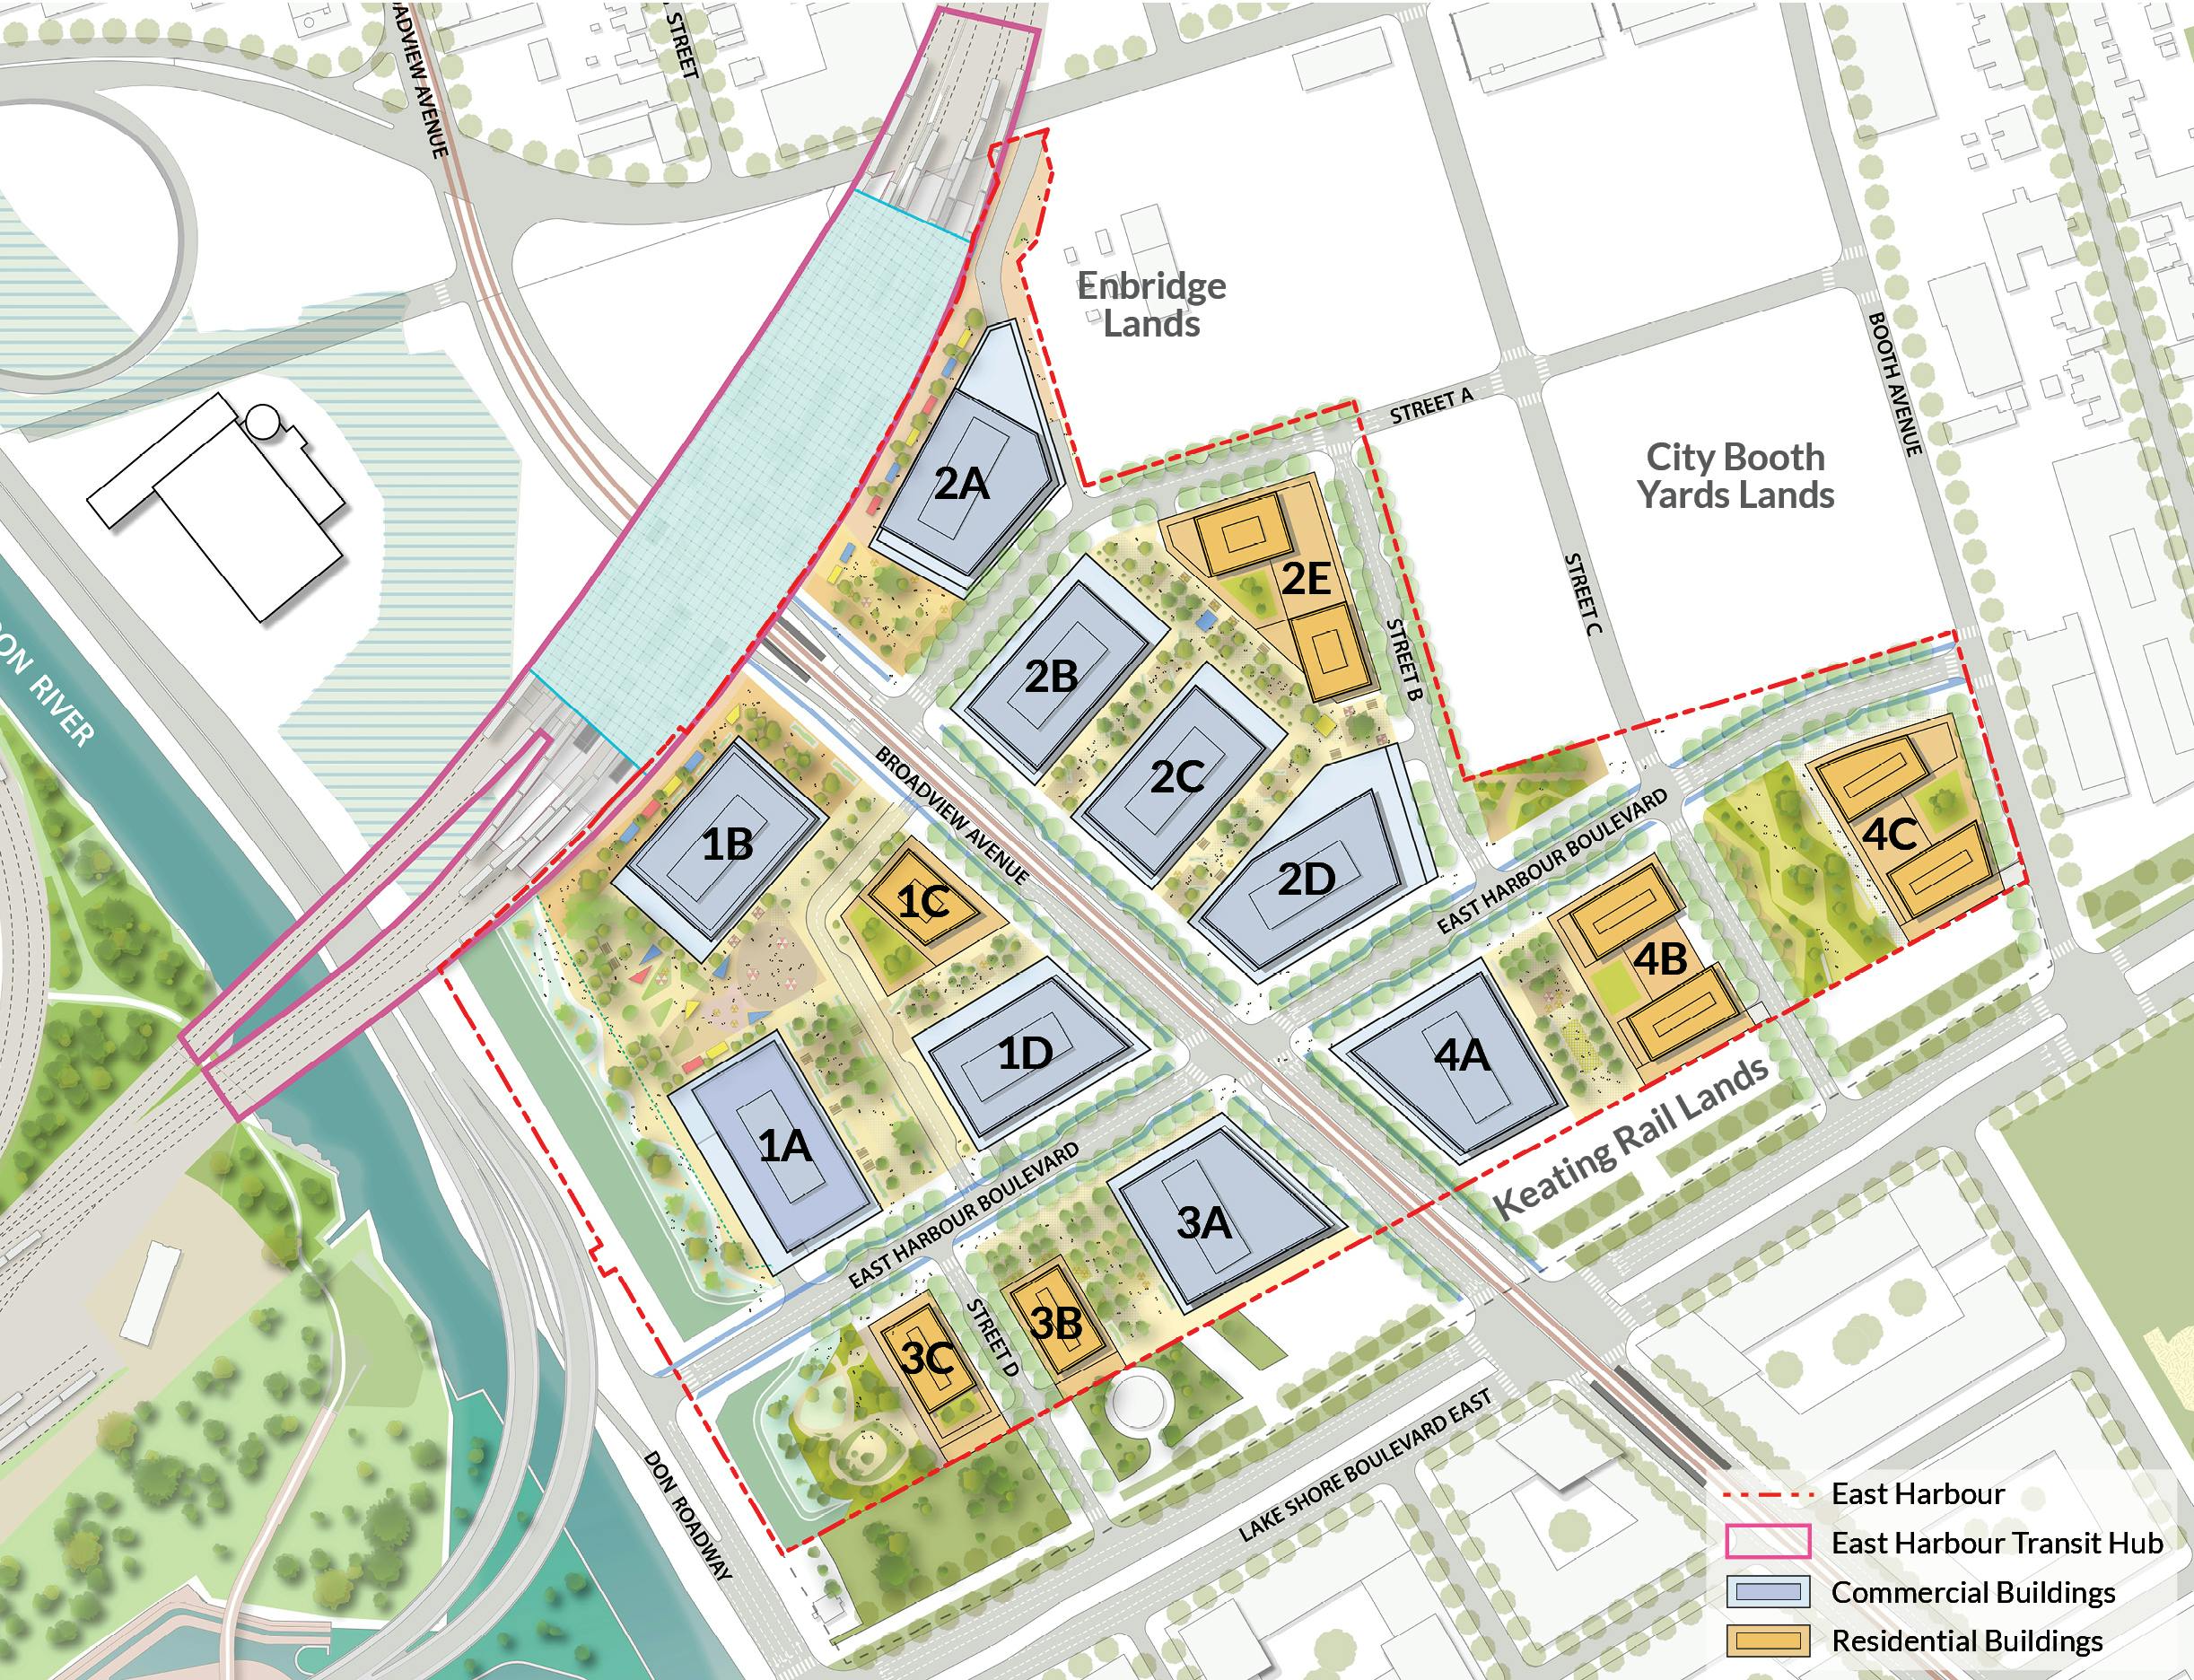 East Harbour Mixed-Use Master Plan 2021